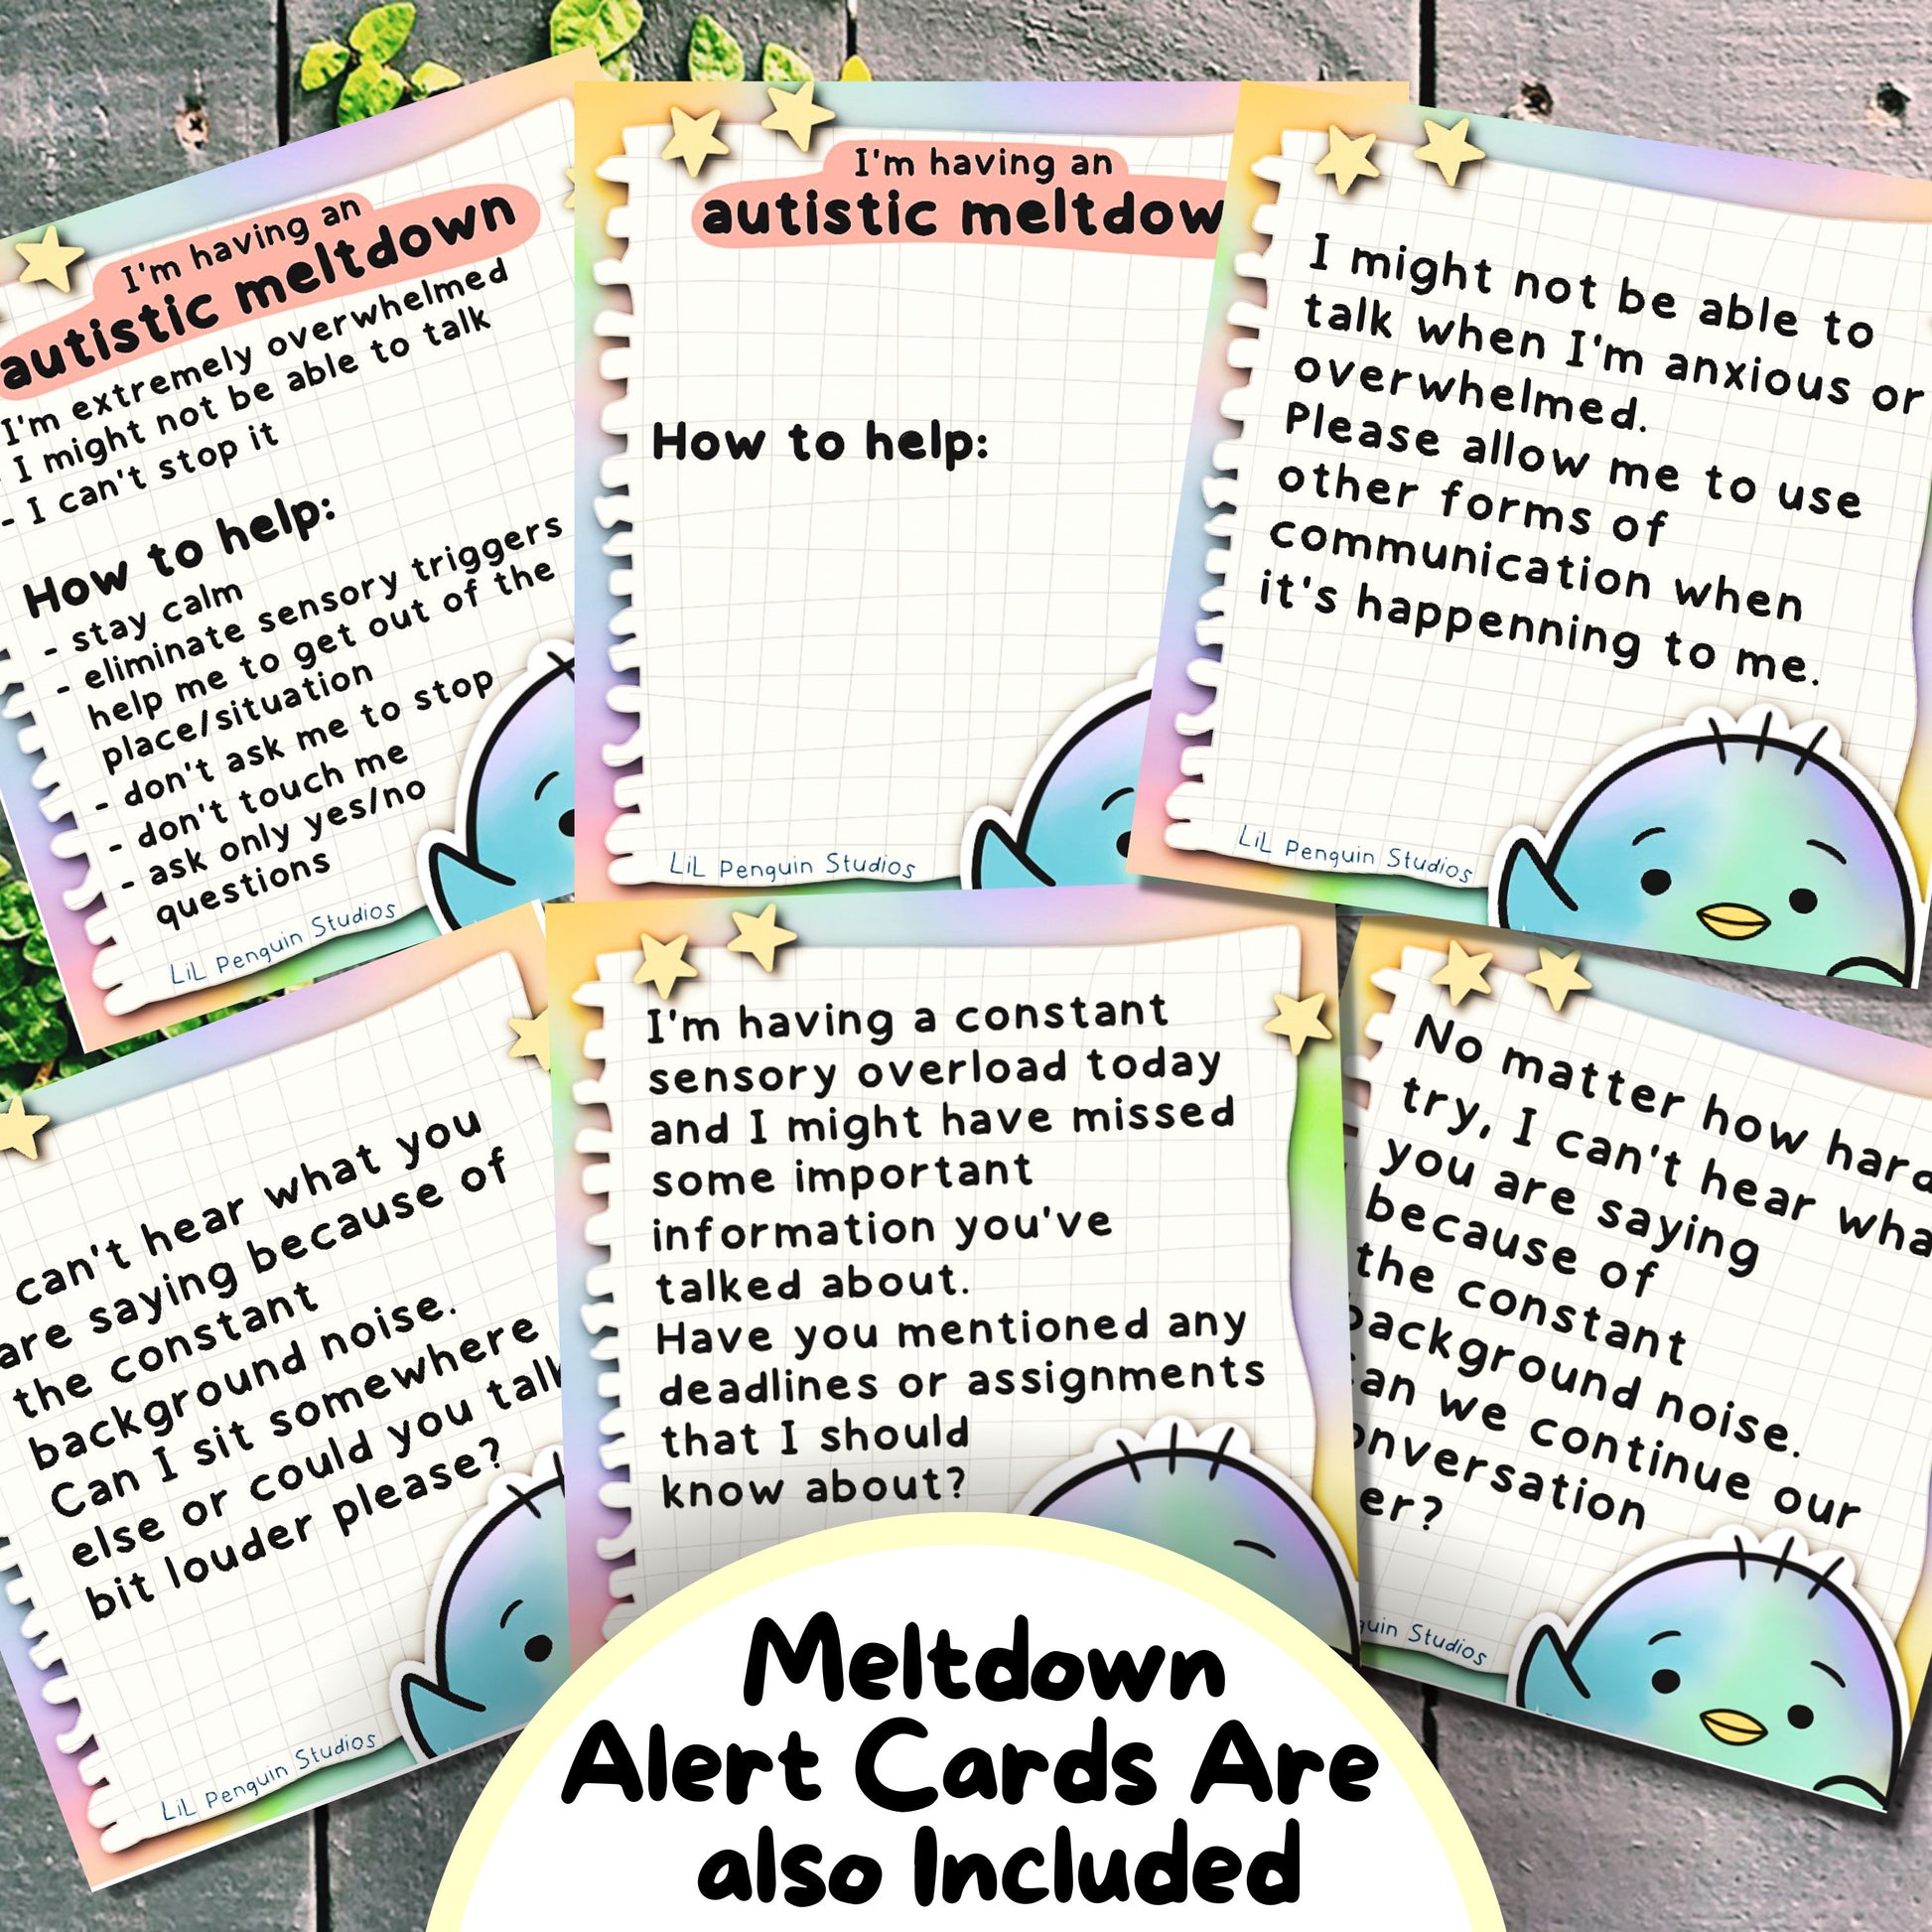 Communication Cards with Explanations (Meltdown Alert Cards are also included) - Autism Self-Advocacy Card Pack (School, Work, Friends, Family) written and hand-drawn by an autistic artist (LiL Penguin Studios( 